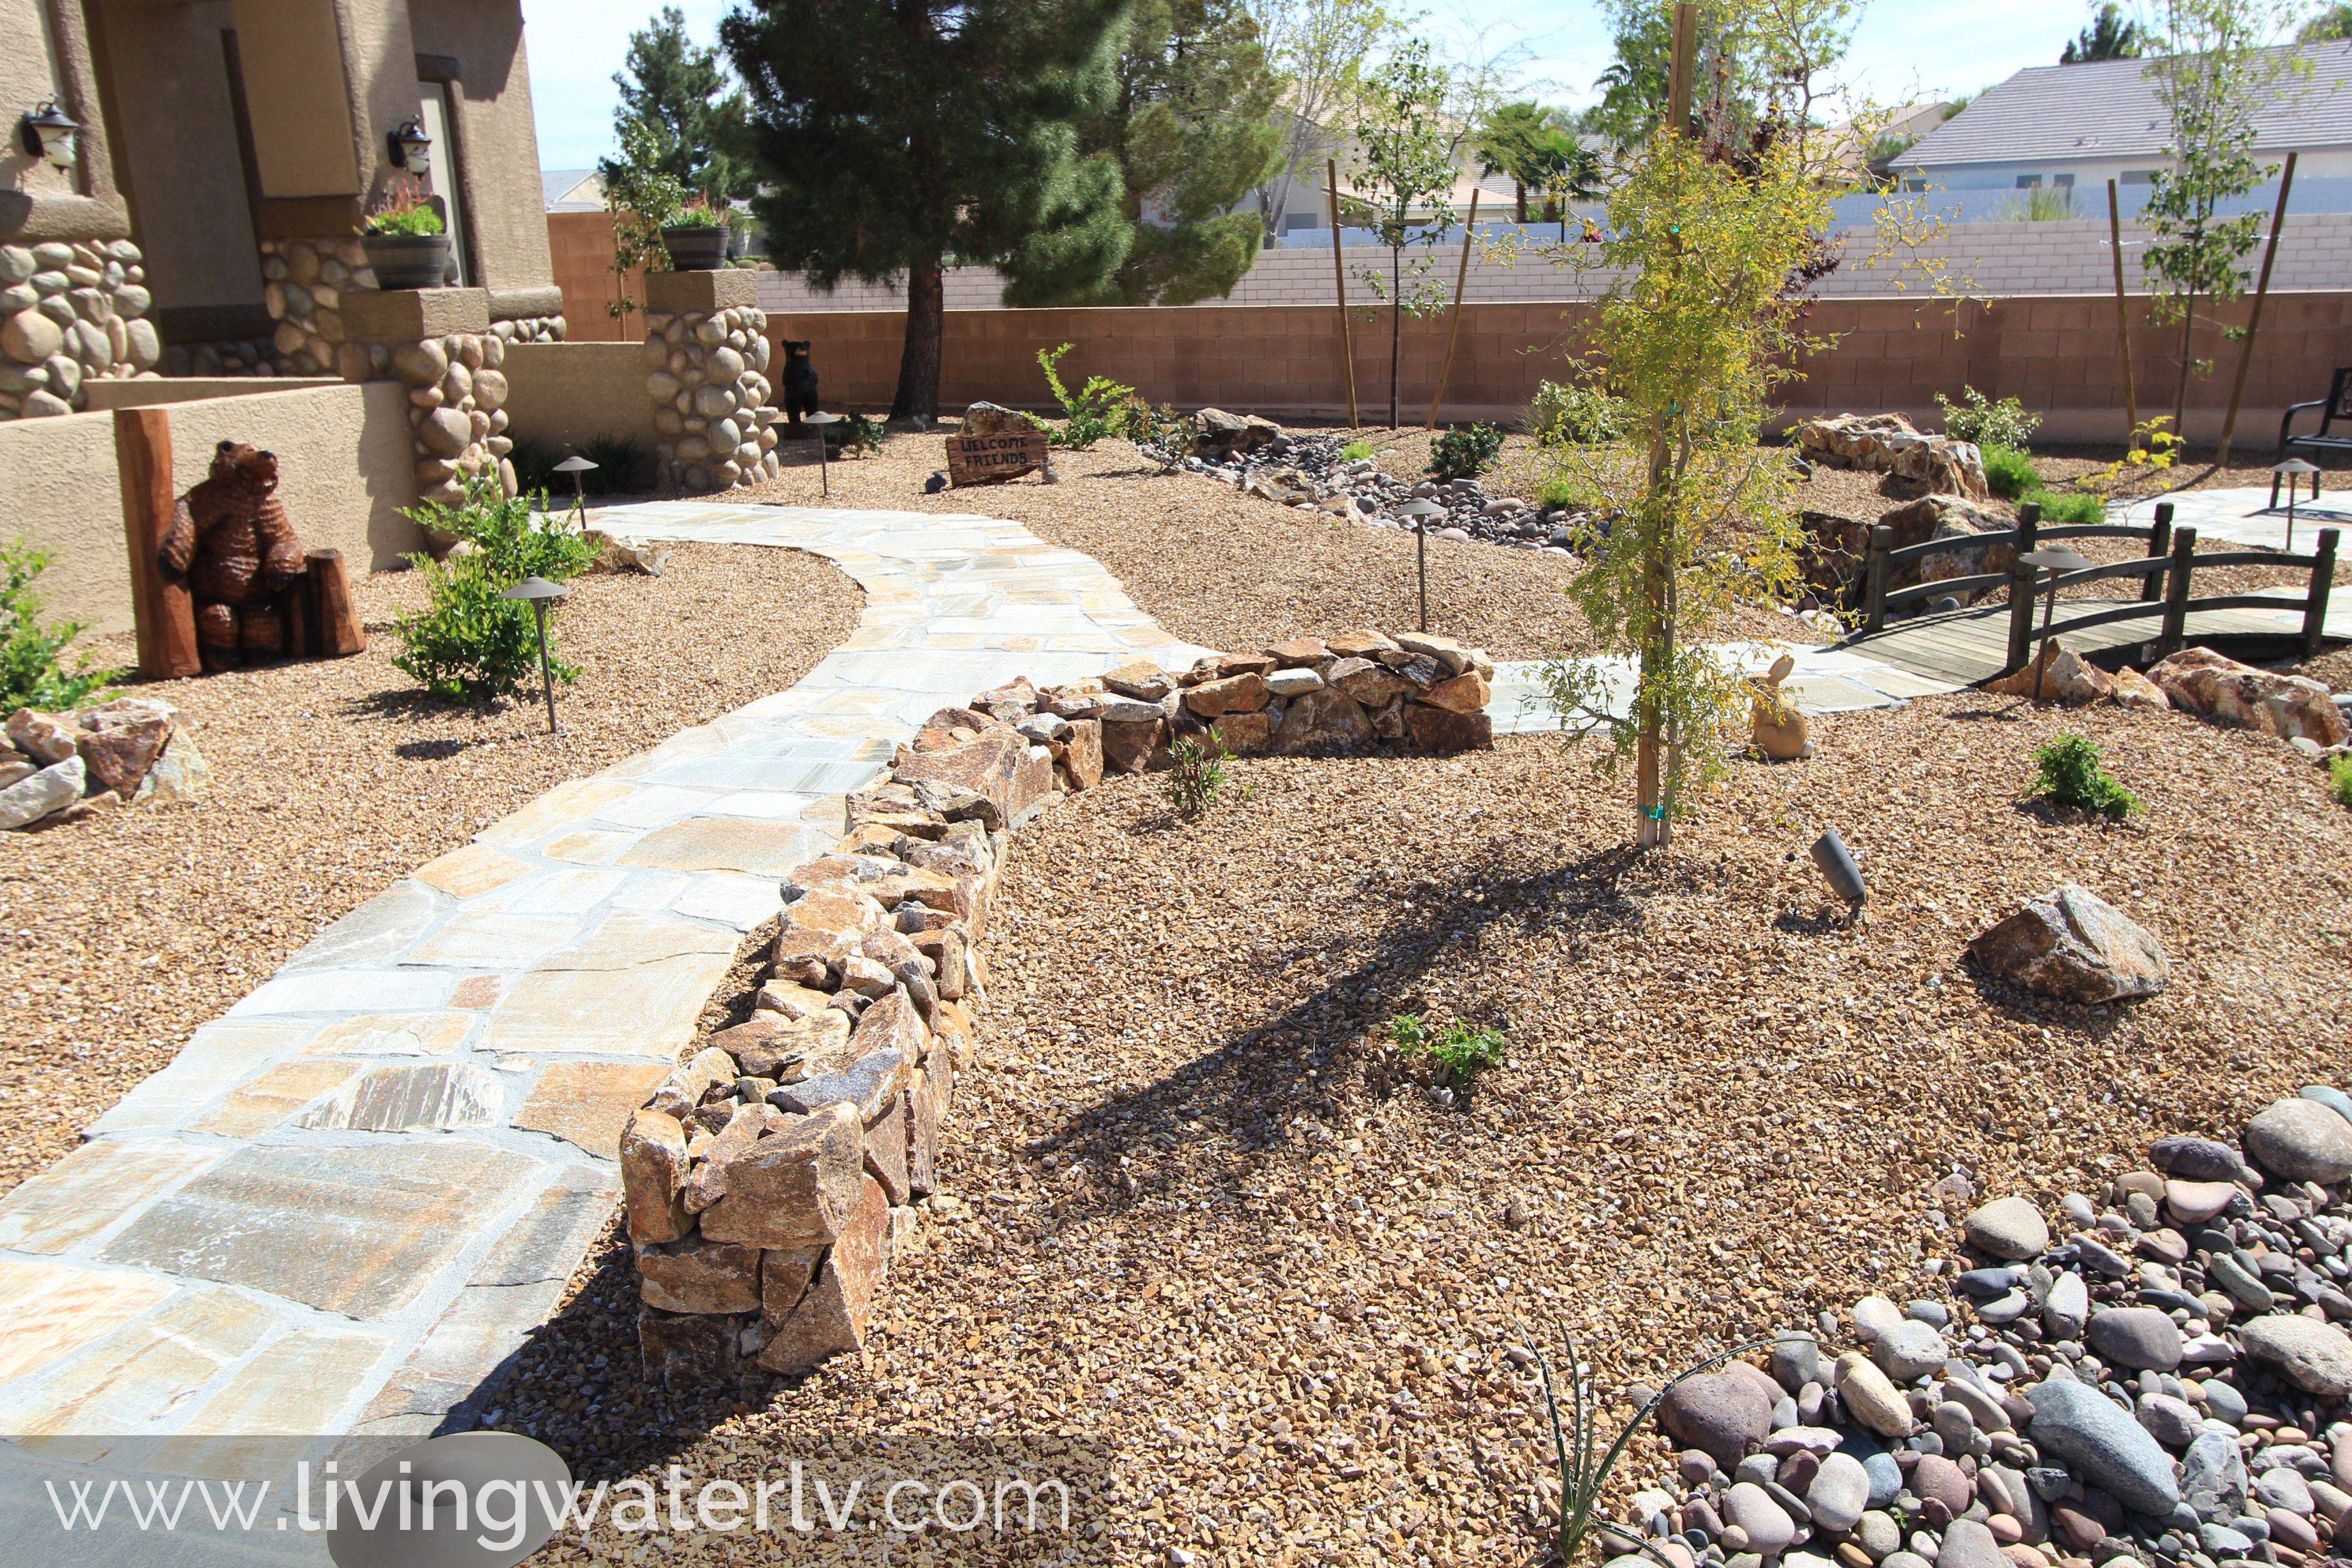 Palm Springs Desert Landscape Images Path To Patio With Rock